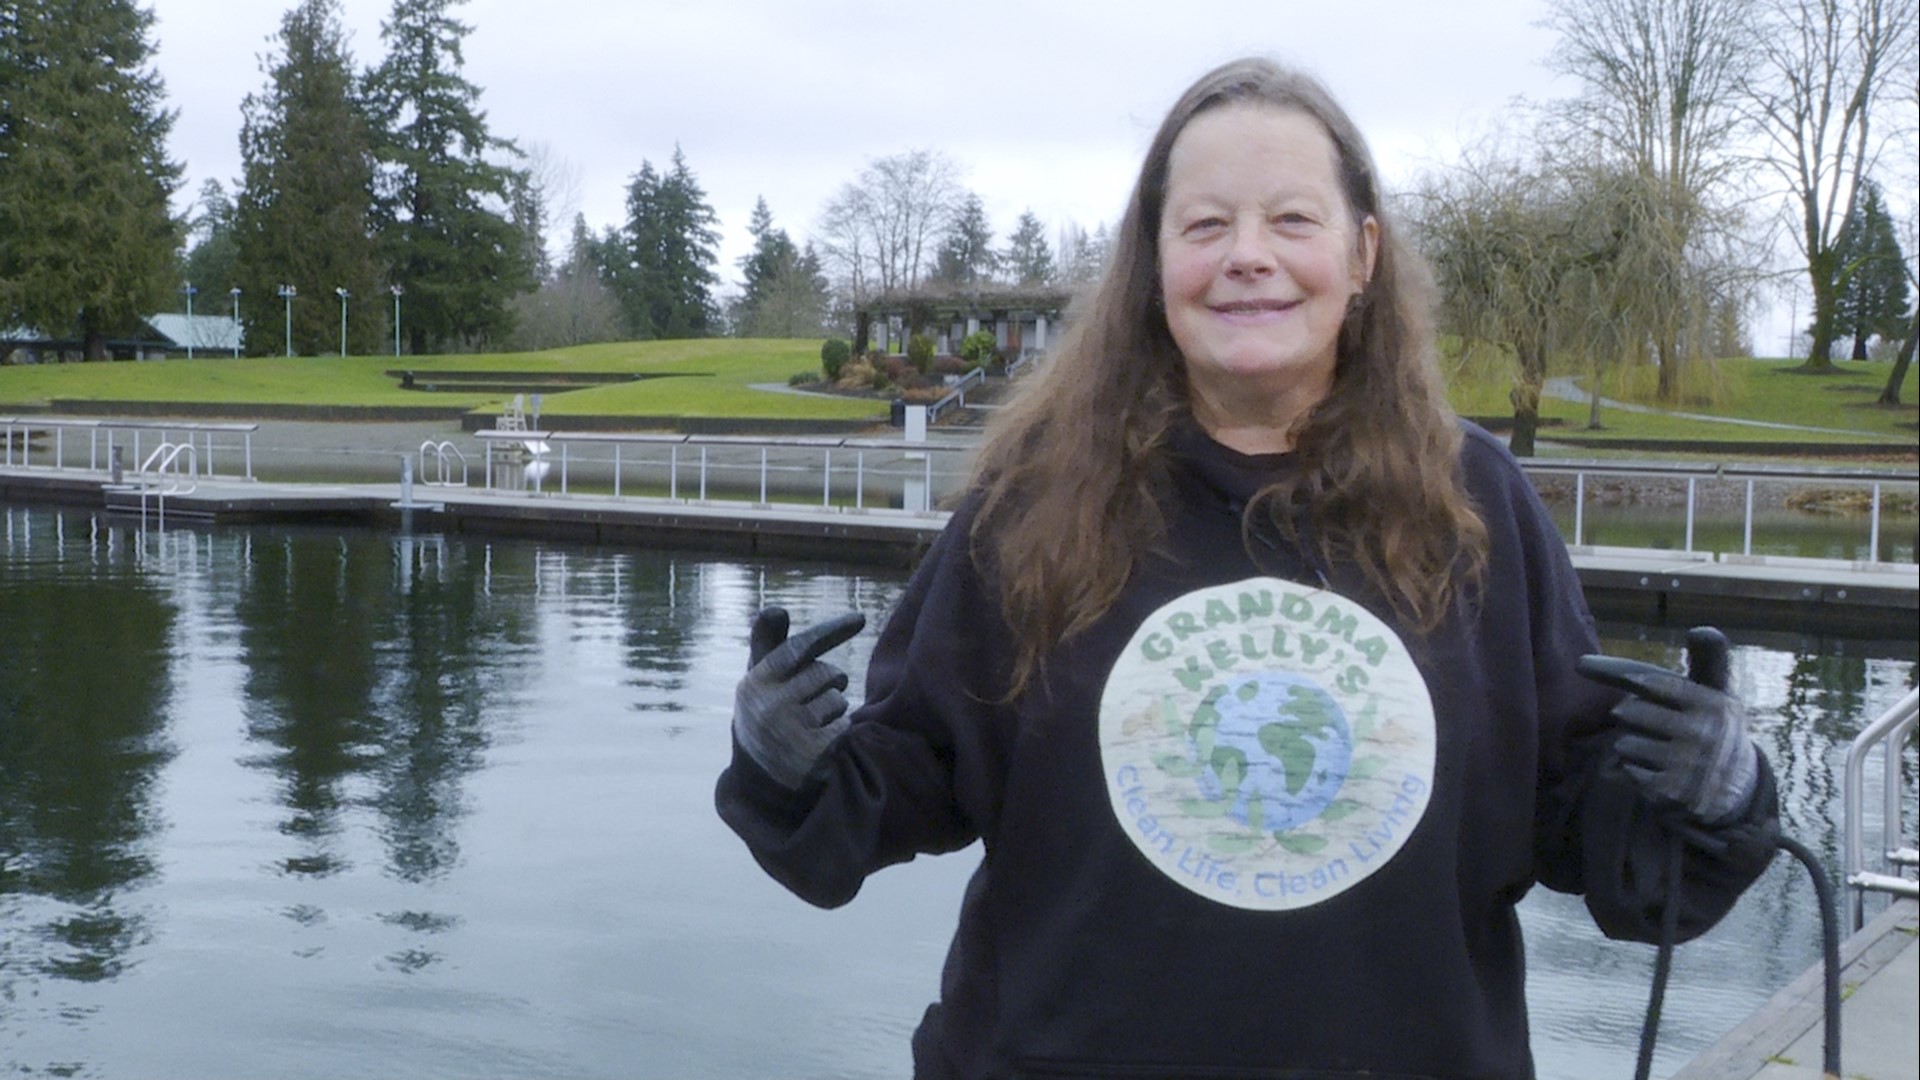 Grandma Kelly has magnet fished wheelchairs, electric scooters, and many other items that don't belong in the water 🤯. #k5evening